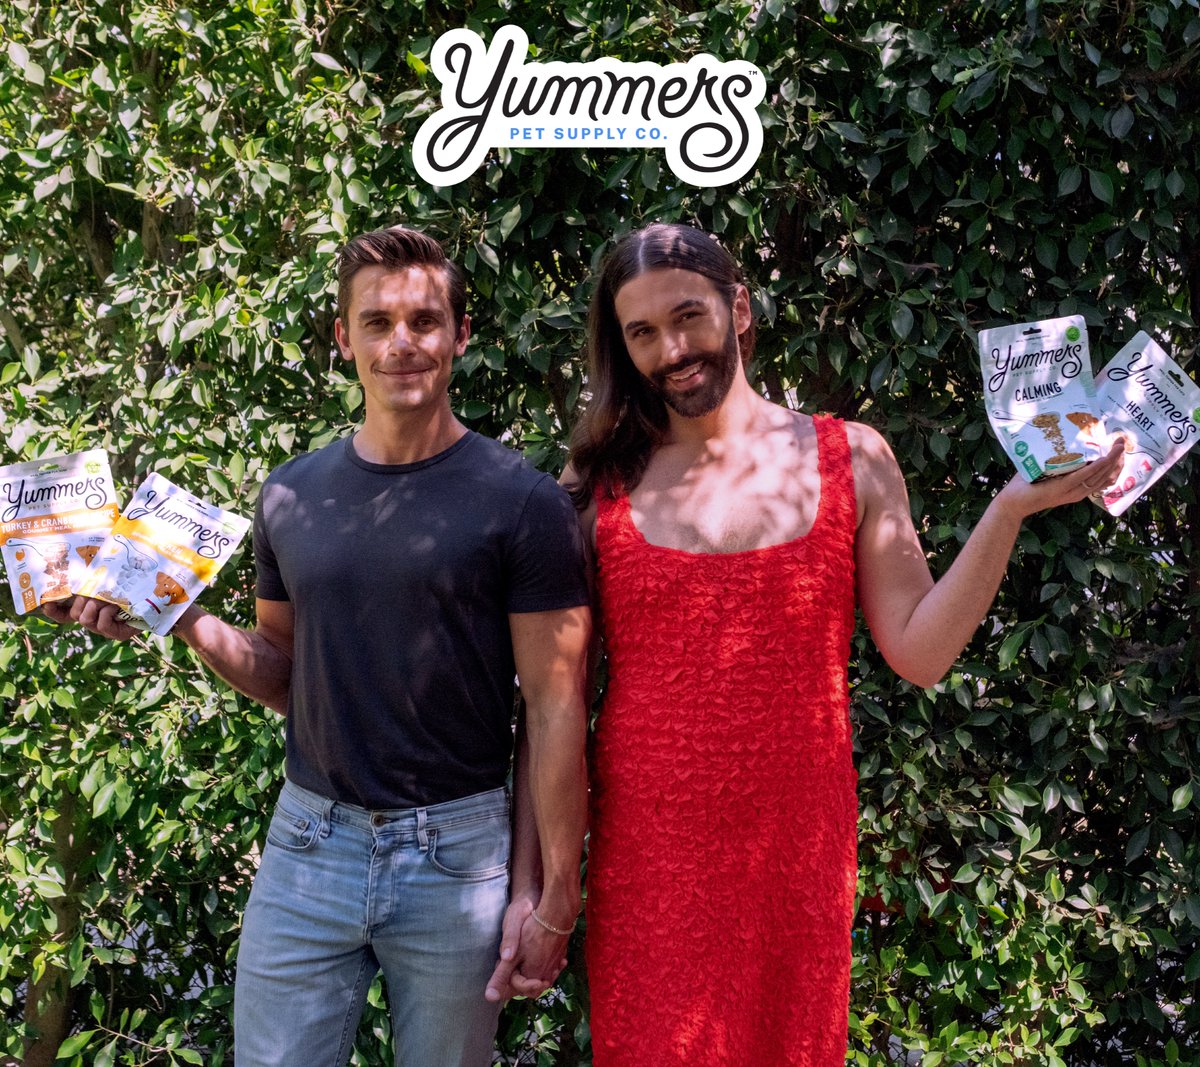 Mini clarification - not life partners, *business* partners. Introducing our new company Yummers: meal mix-ins for pets! Mix a little into your pet's bowl each meal to add extra flavor, variety & nutrition into their diet (I promise I made @jvn wear a hairnet in the test kitchen)